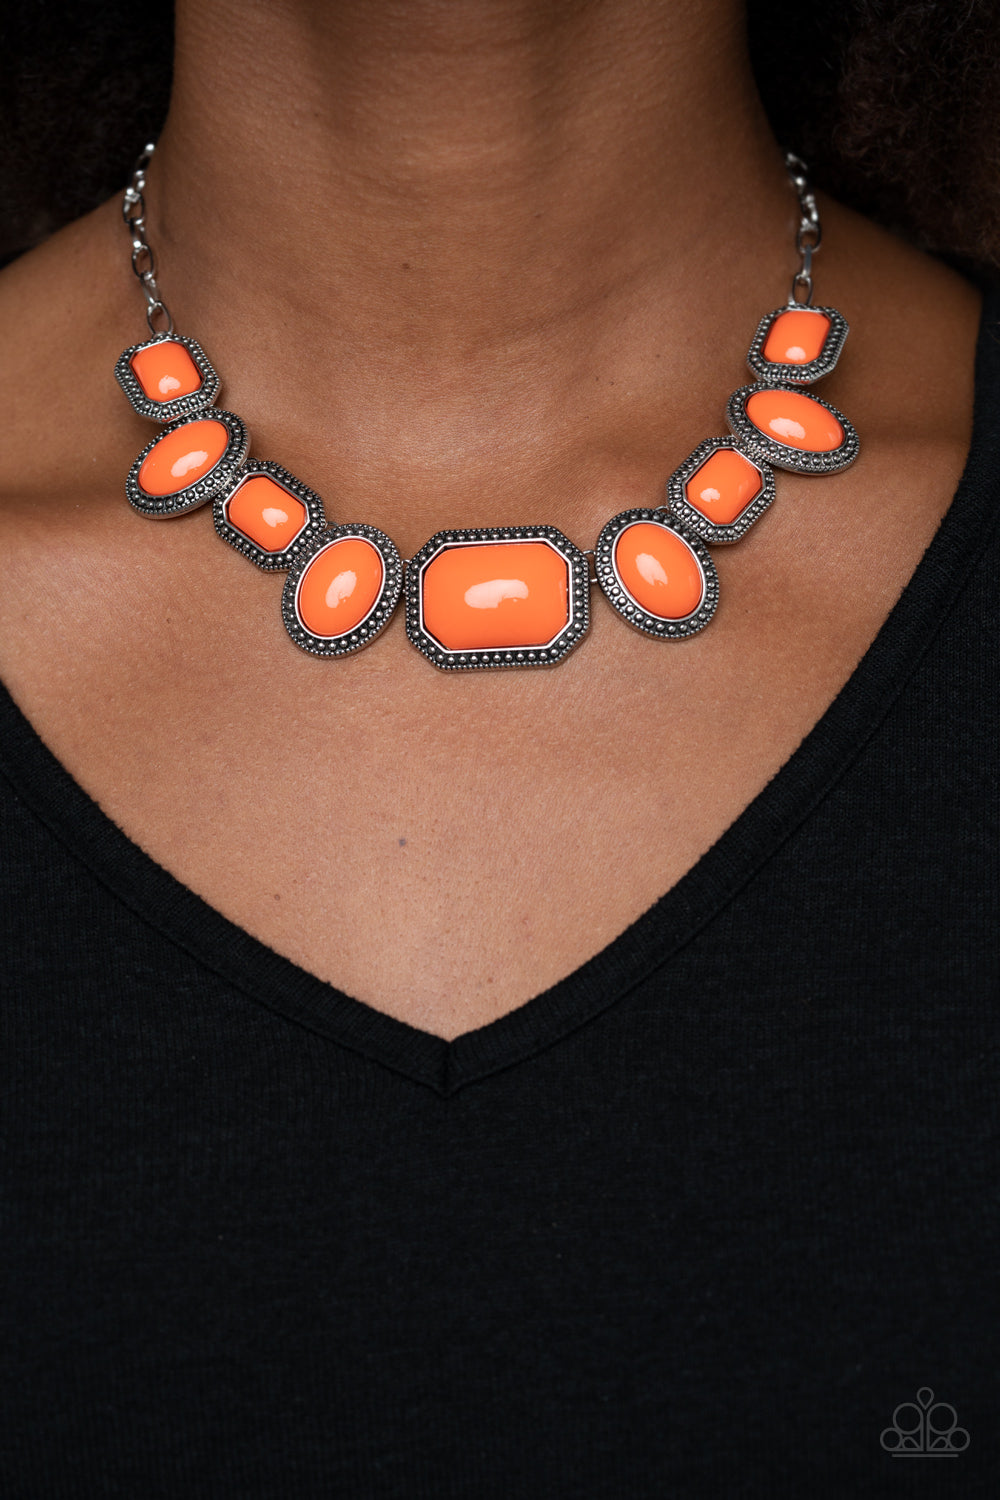 Paparazzi Jewelry & Accessories - Lets Get Loud - Orange Necklace. Bling By Titia Boutique